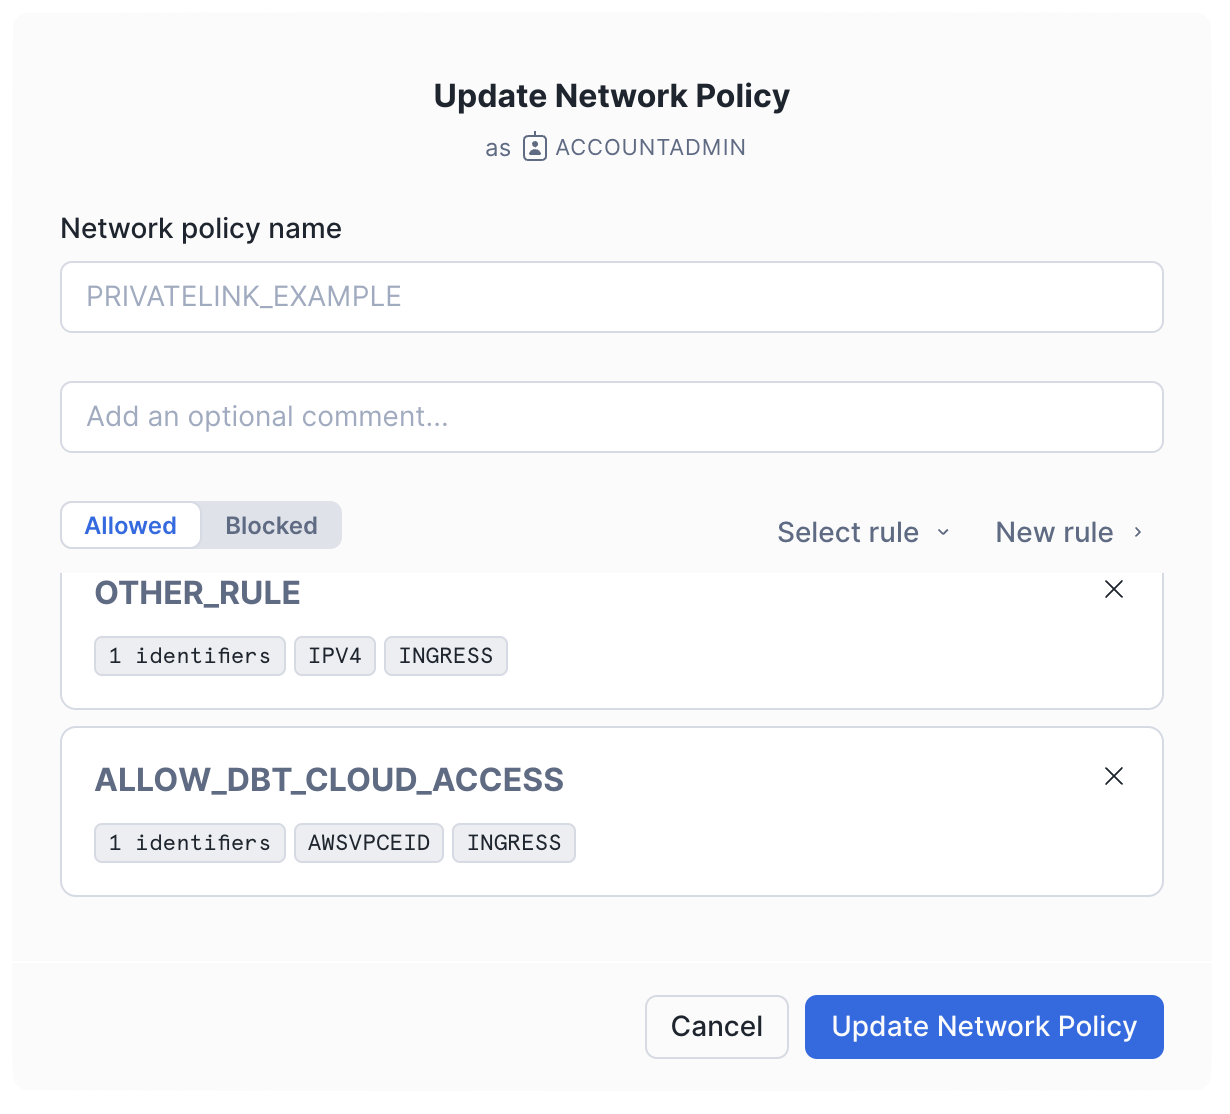 Update Network Policy